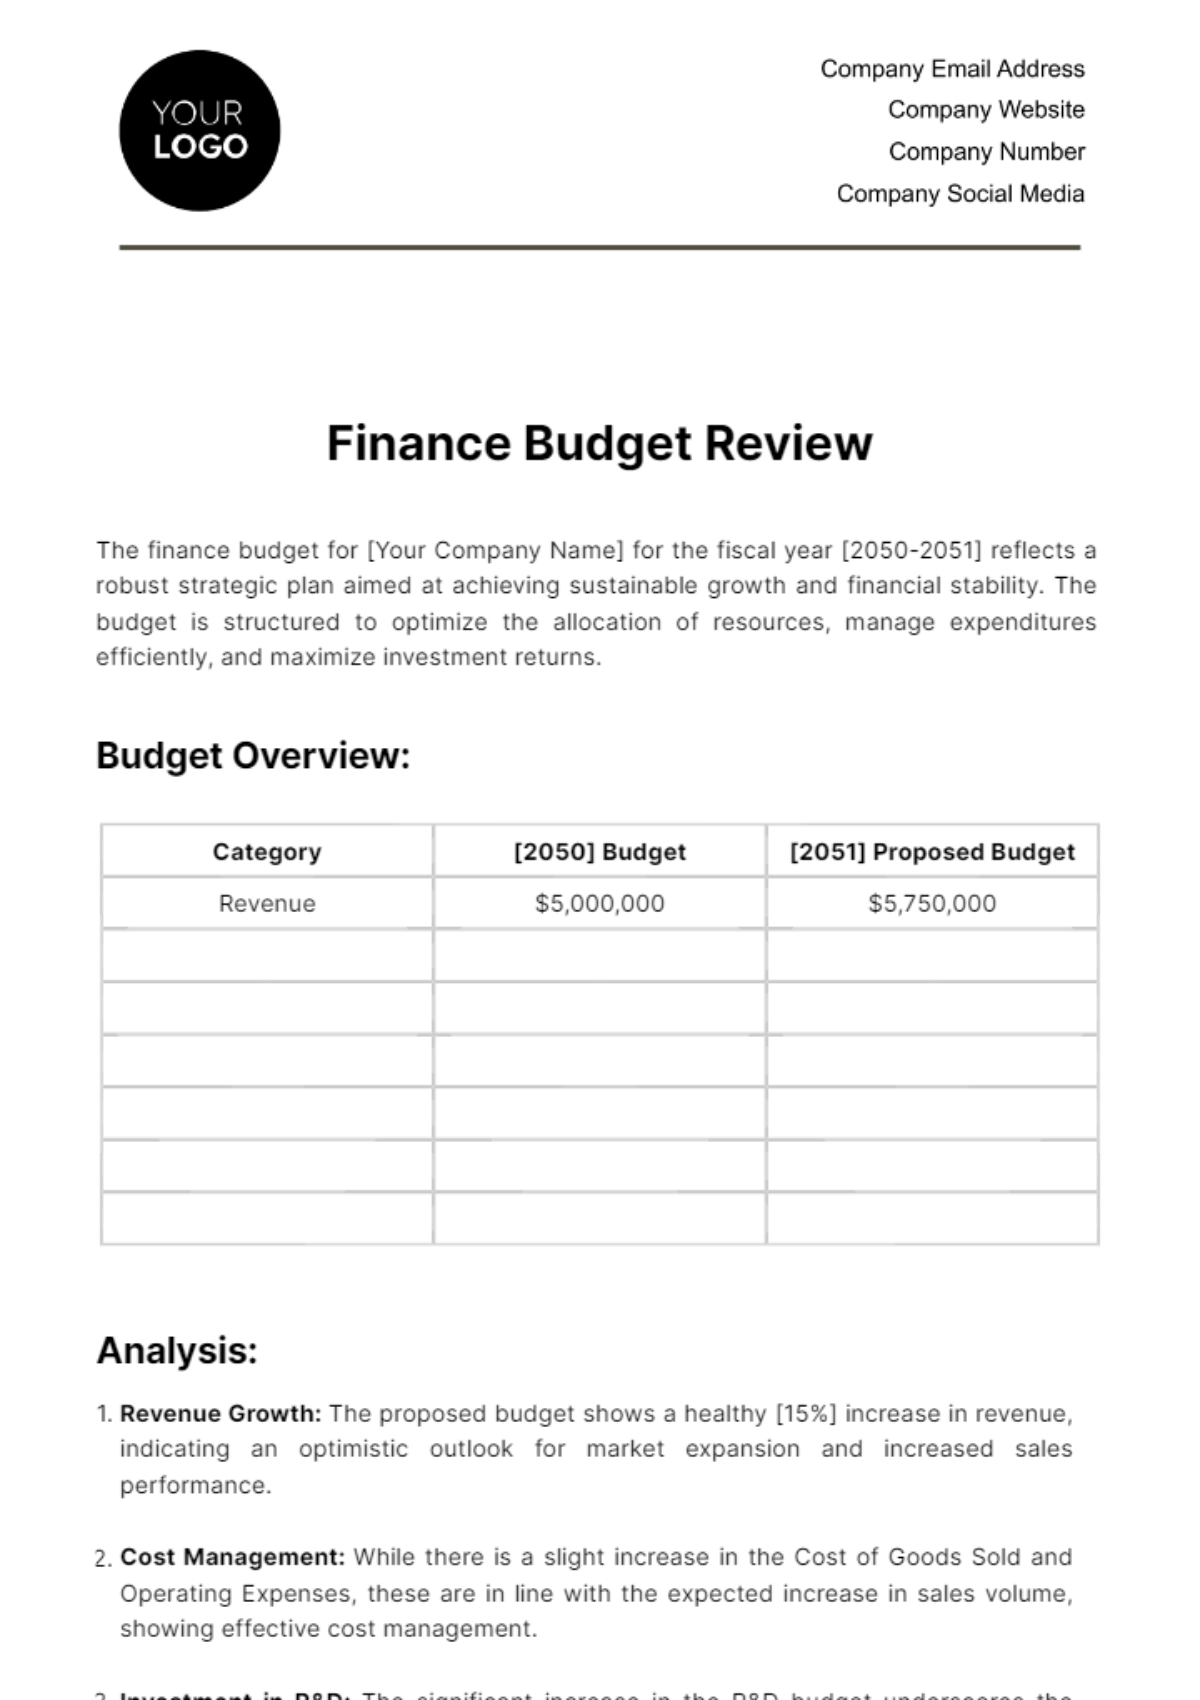 Free Finance Budget Review Template